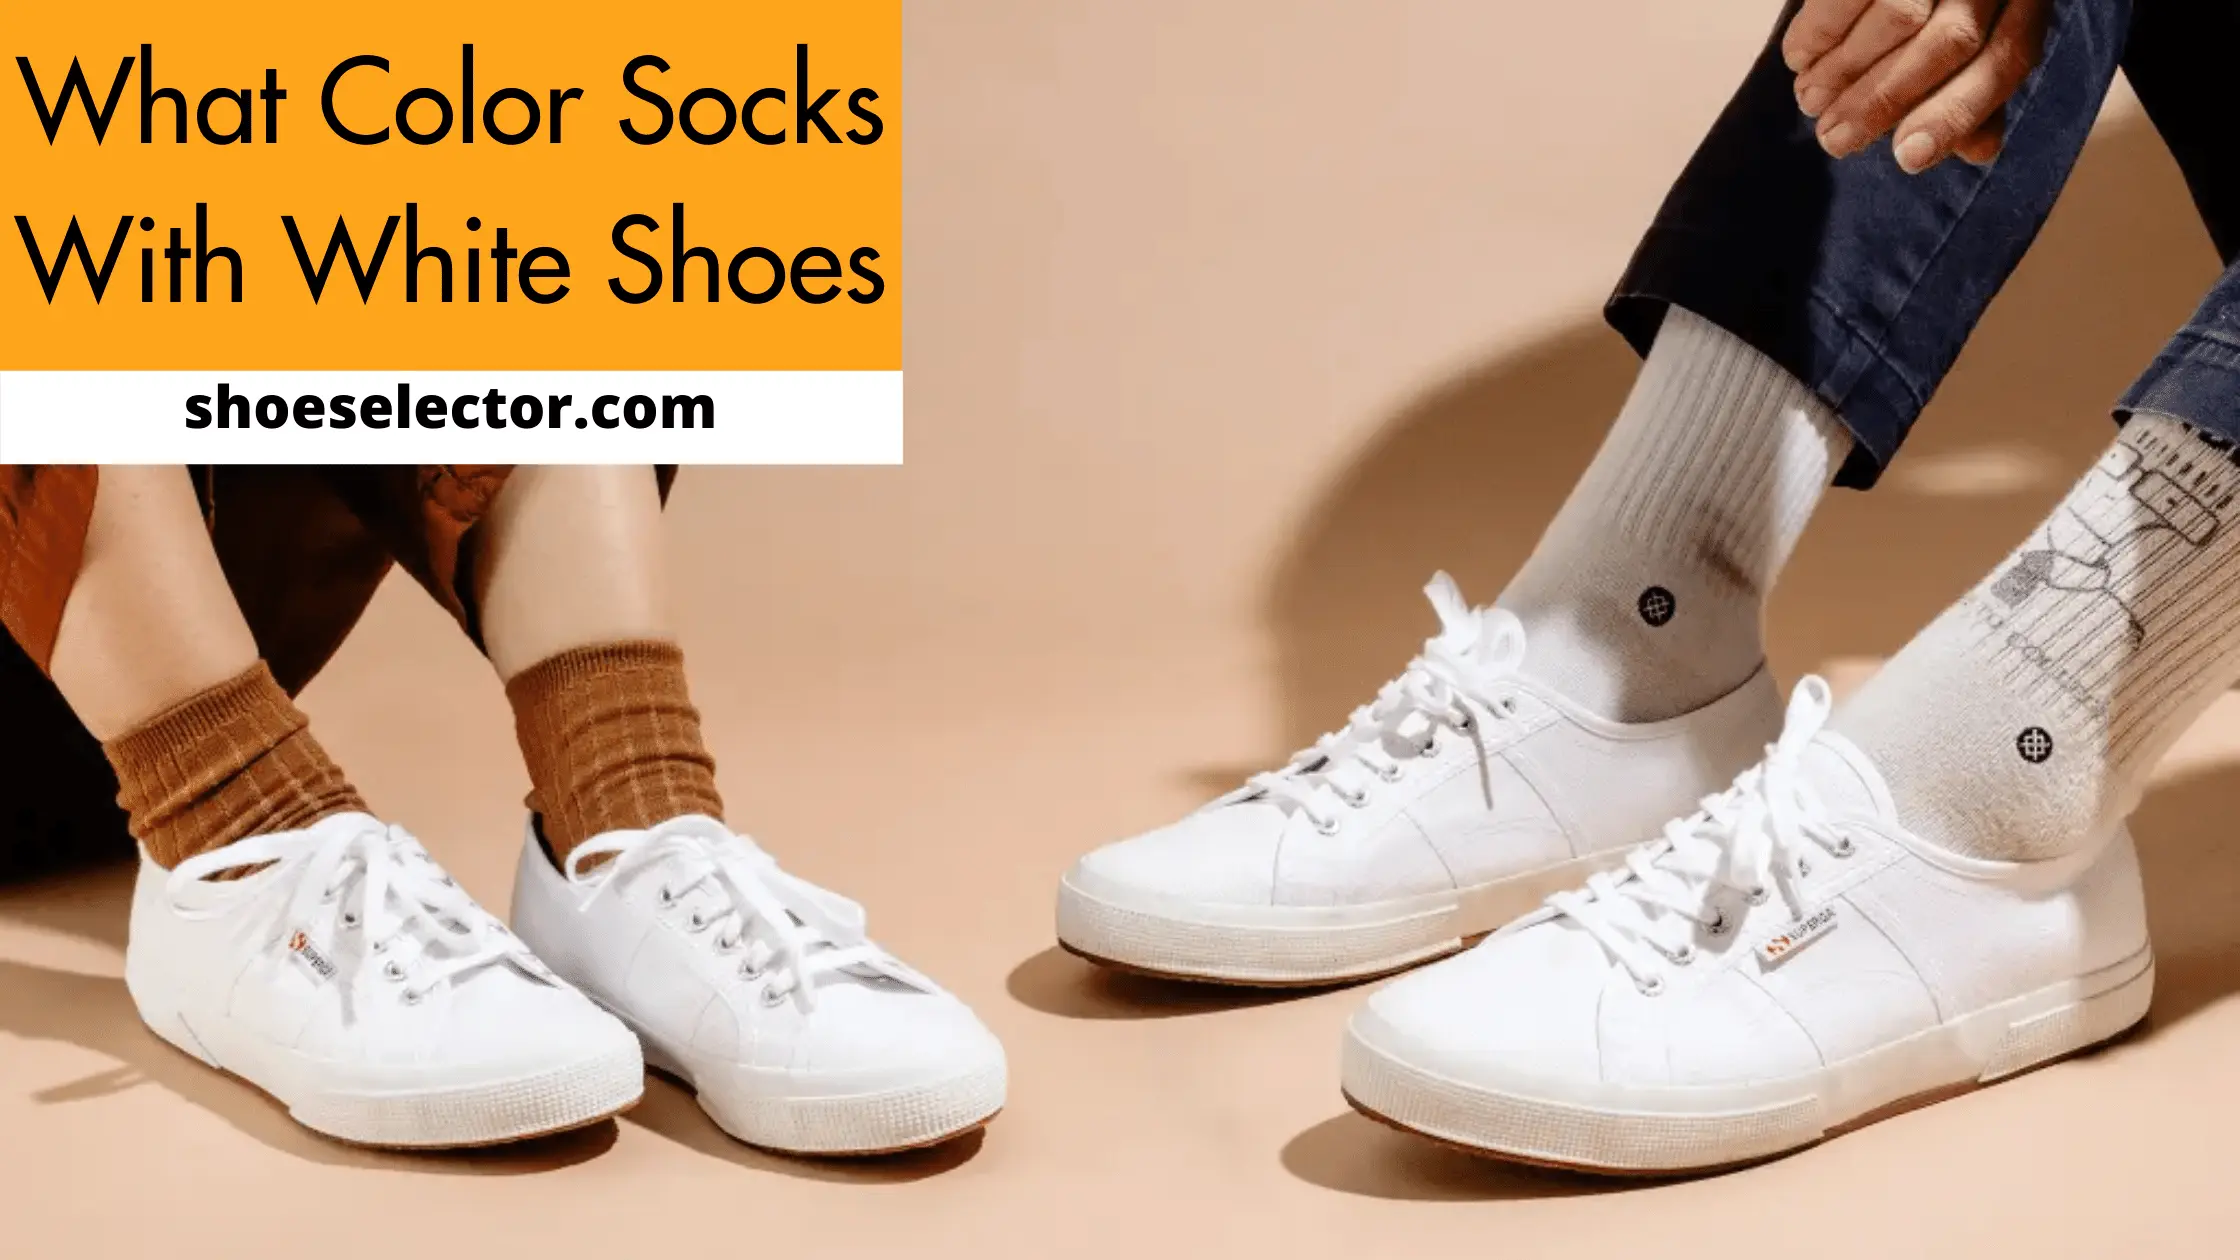 What Color Socks With White Shoes? Quick Guide